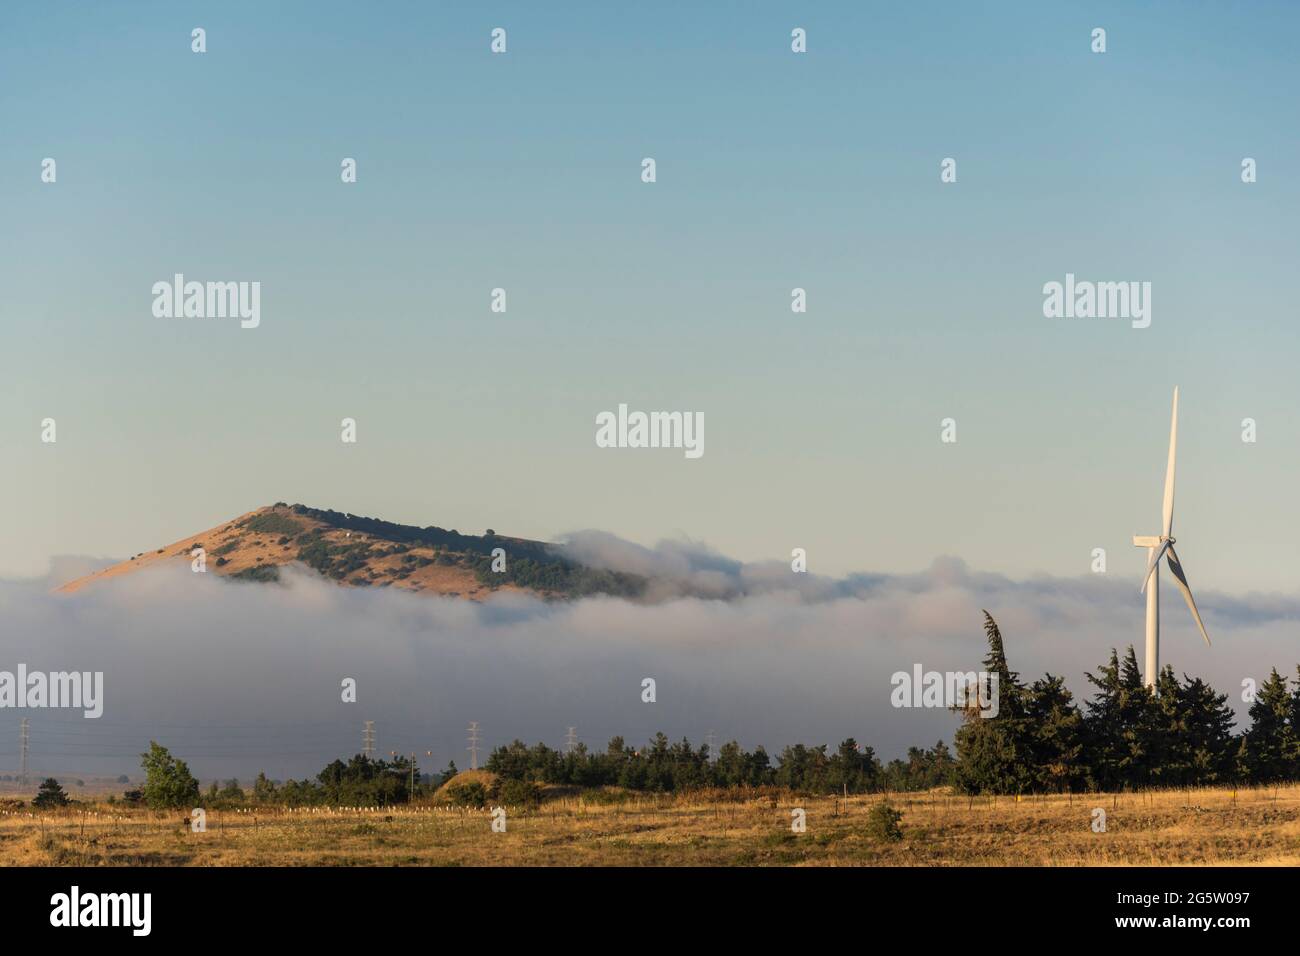 Golan Heights, Israel. Morning mist and wind turbines near the twin mountains of Avital and Bental. Stock Photo